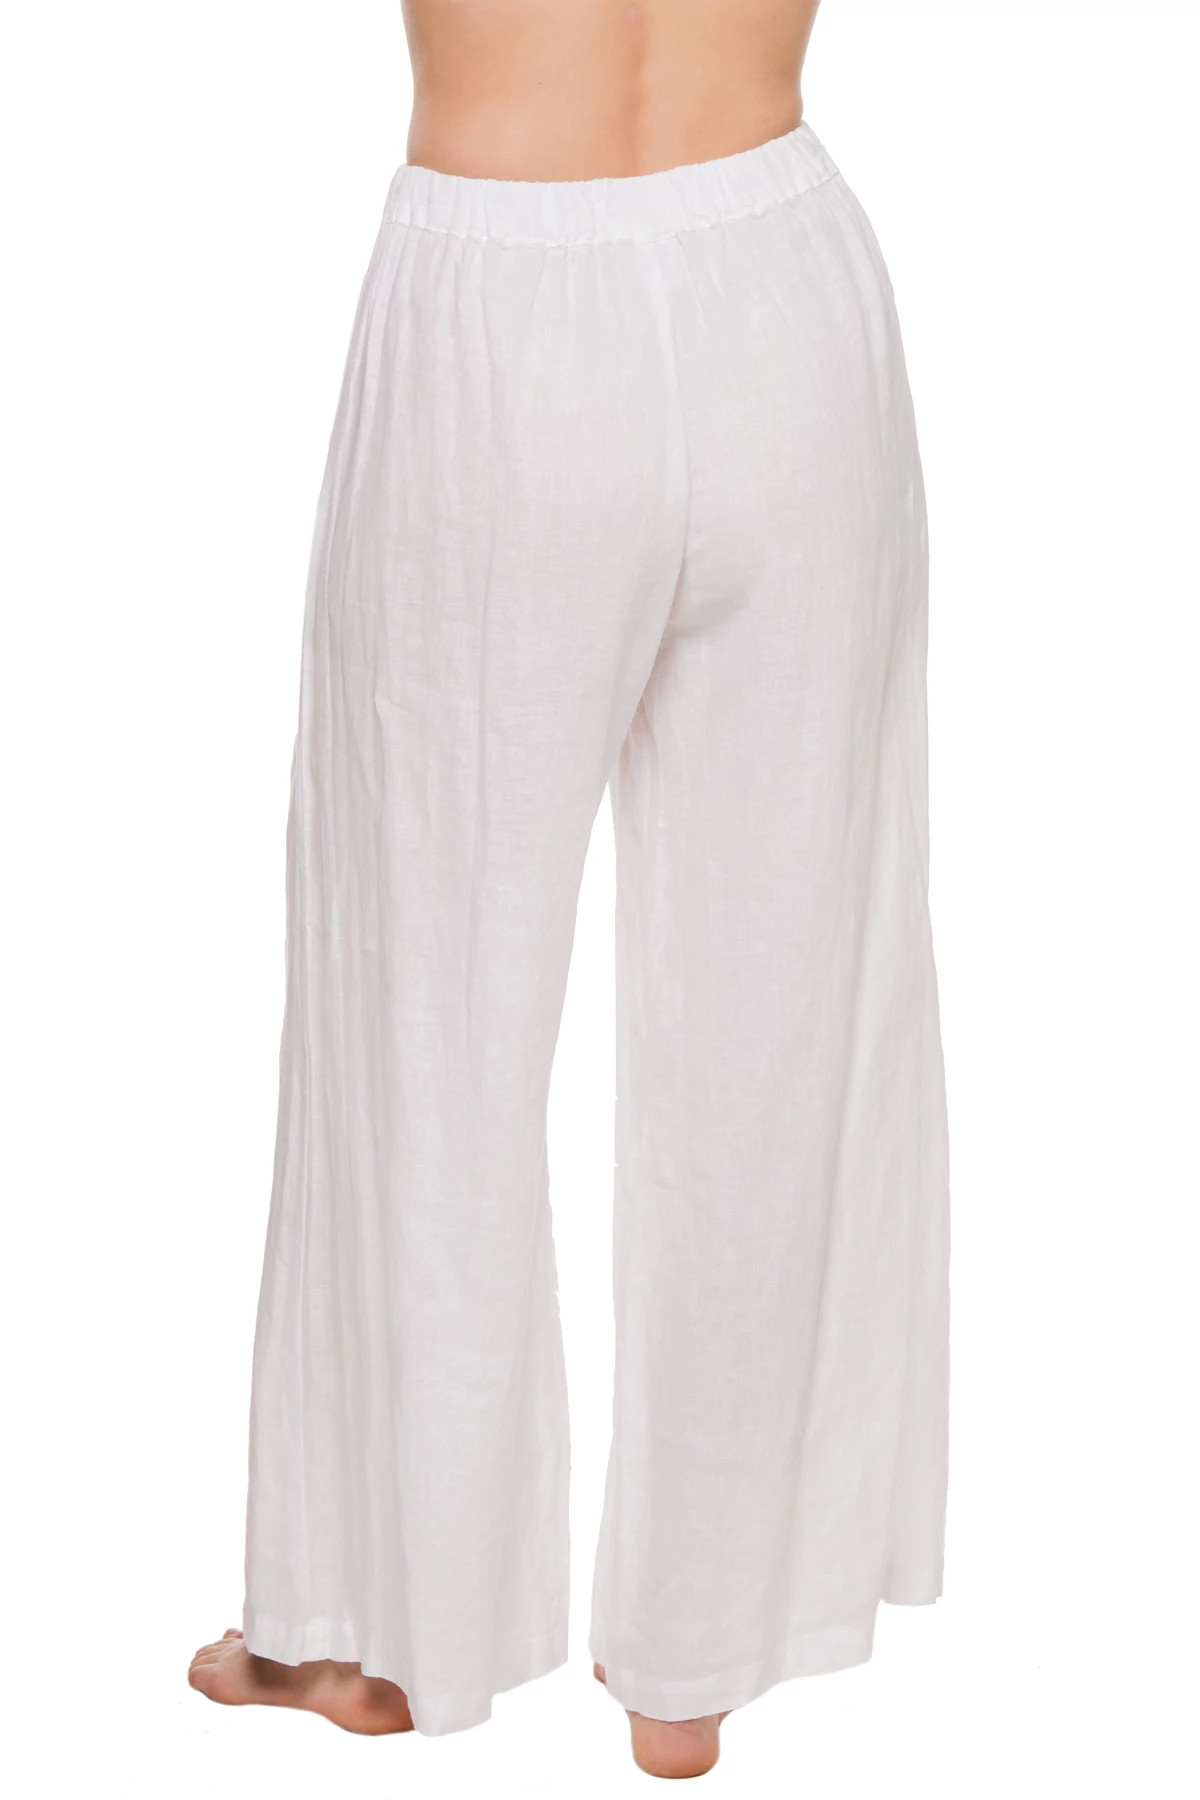 WHITE Wendy Wide Leg Pants image number 2